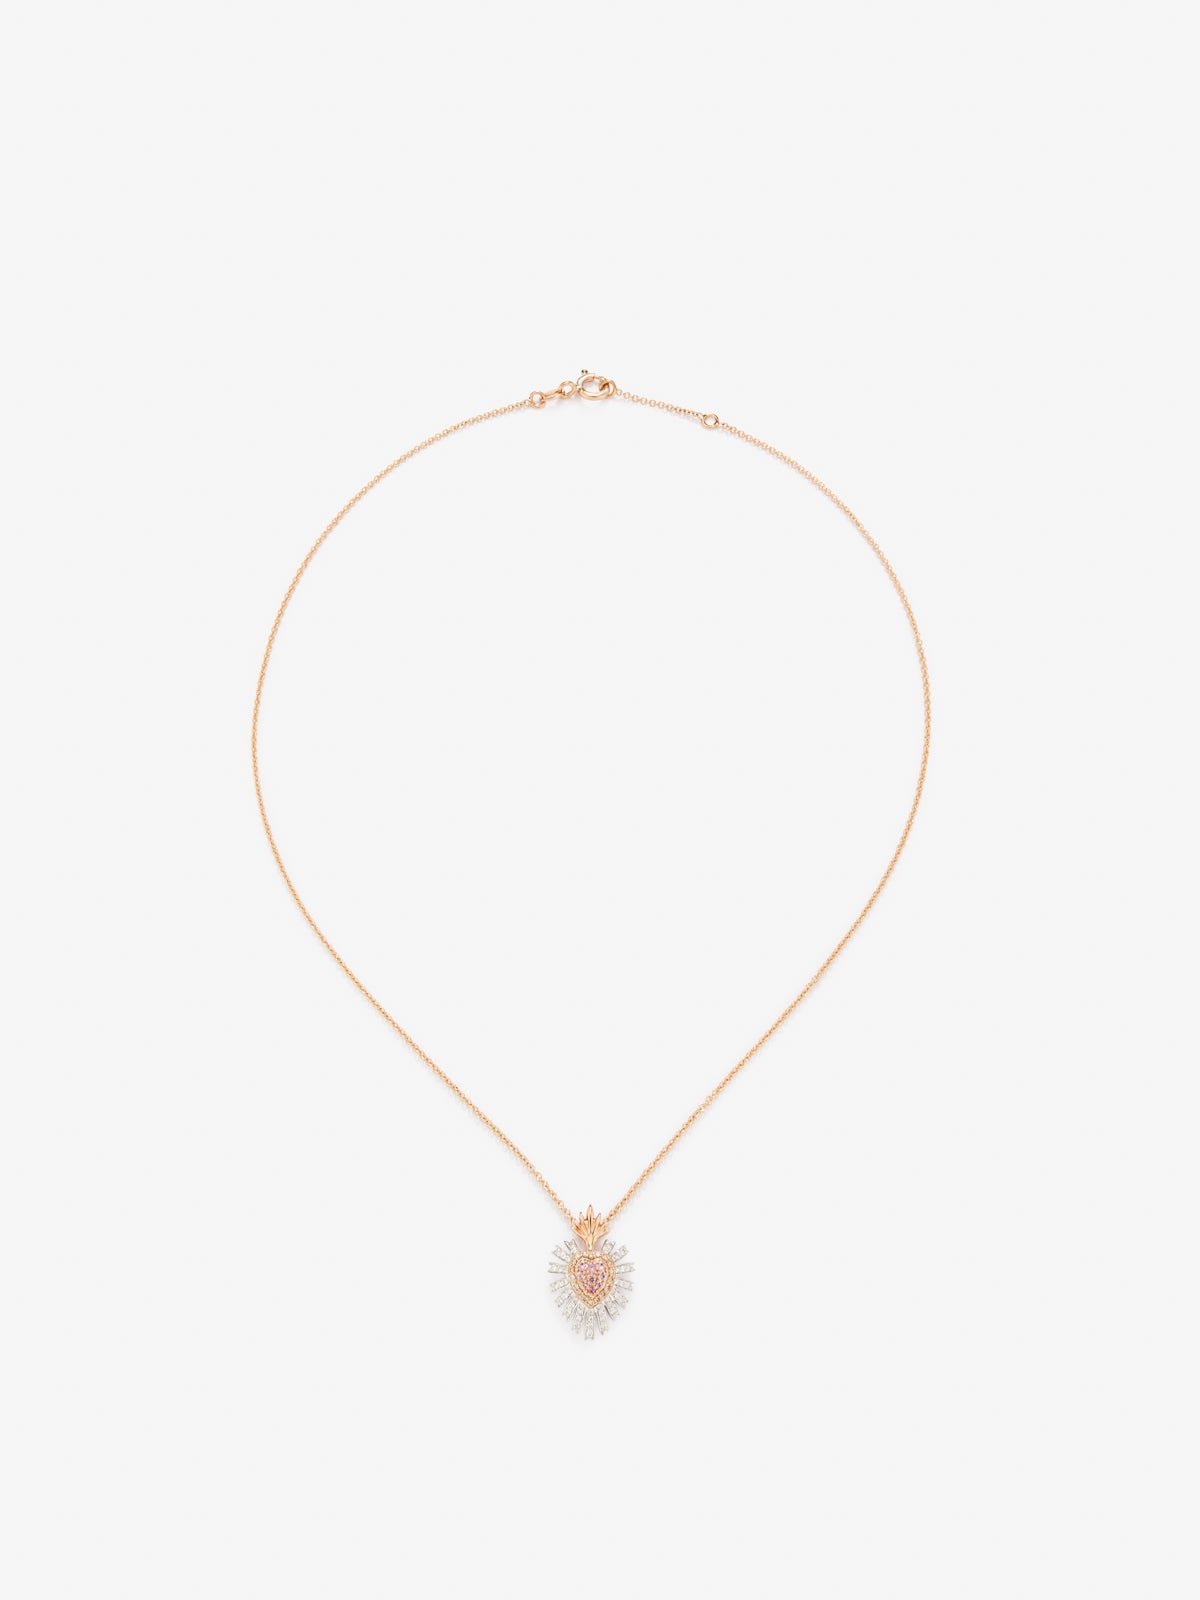 18K Rose Gold Heart Pendant Chain with Sapphire and Diamond